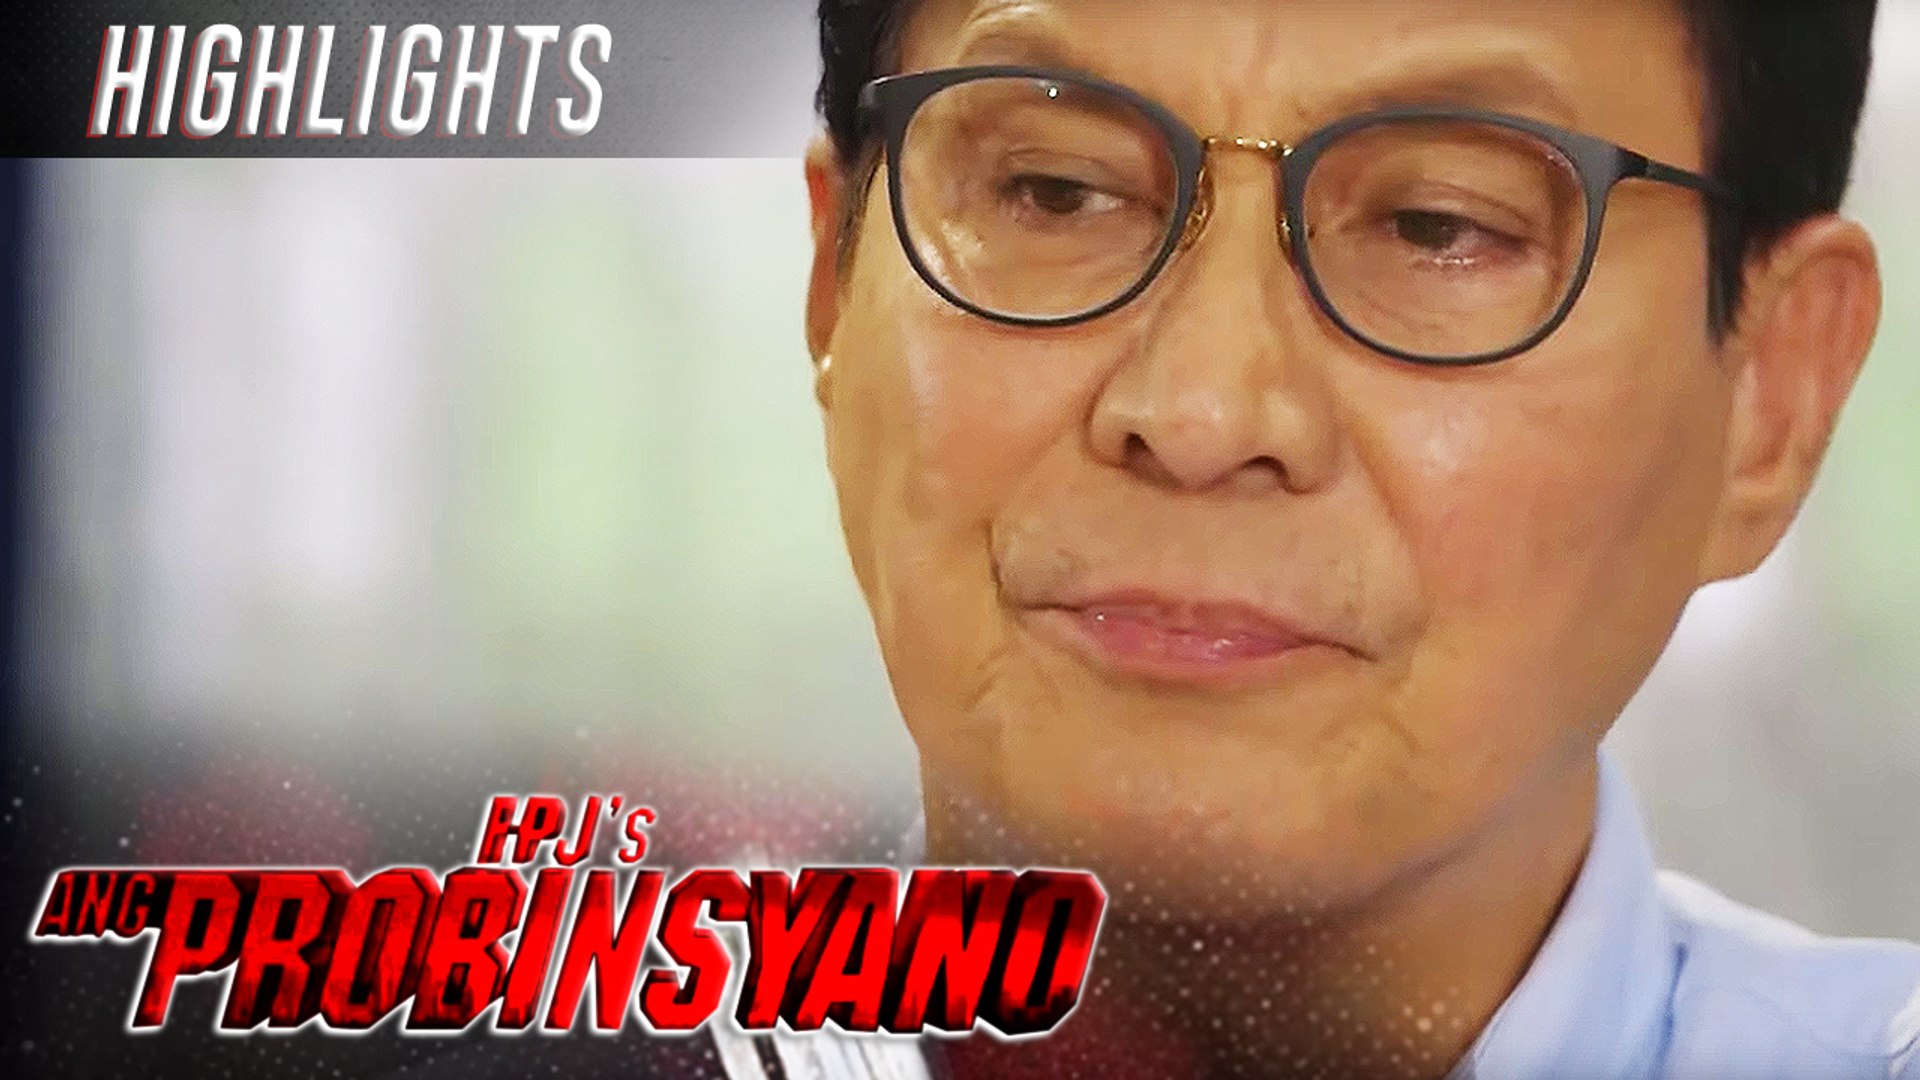 Arturo shares his realization about money and injustice | FPJ's Ang Probinsyano